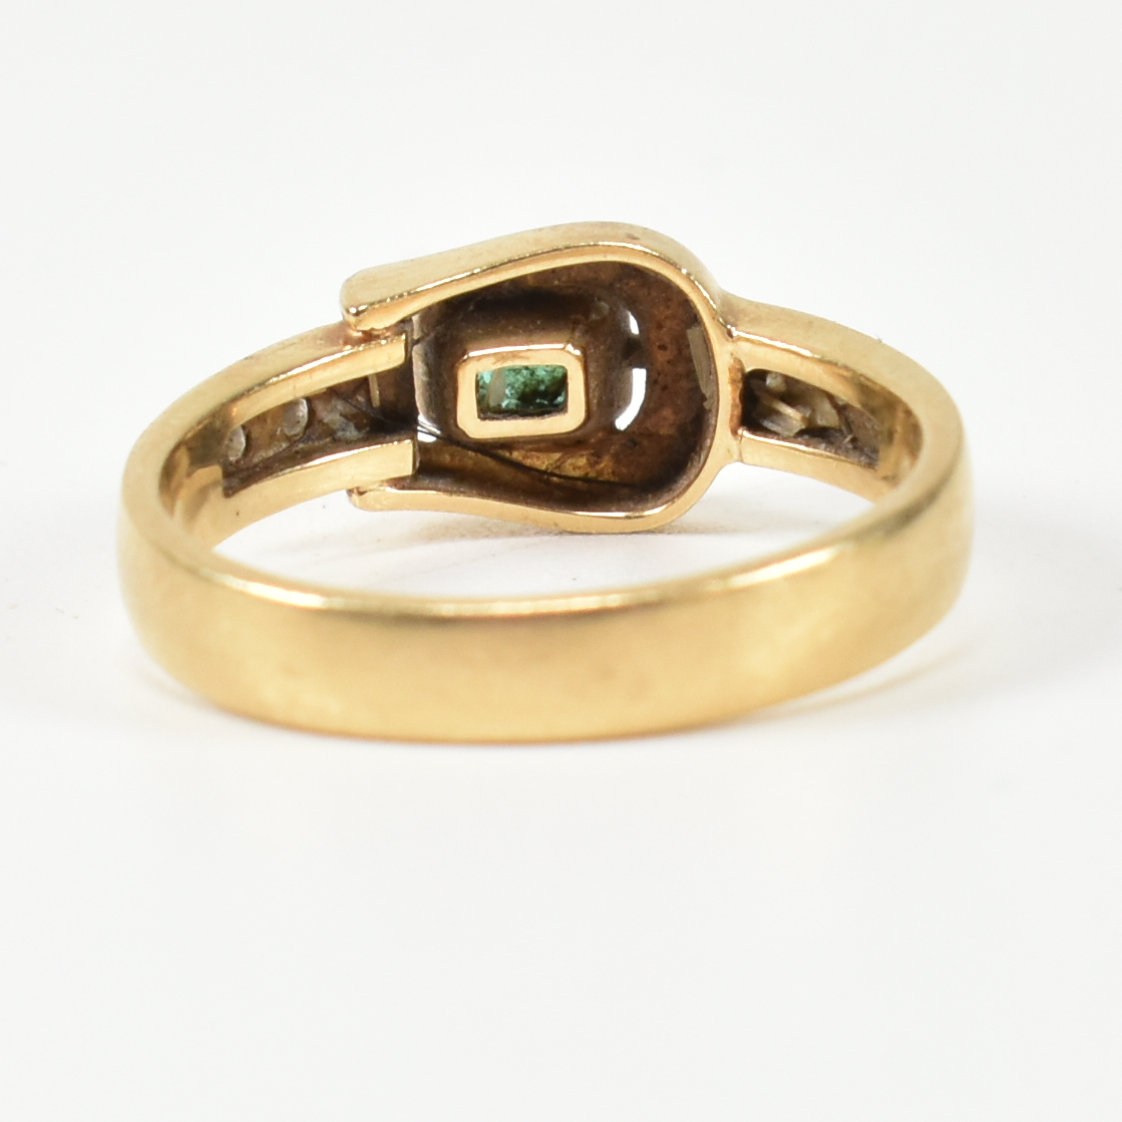 18CT GOLD DIAMOND & EMERALD BUCKLE RING - Image 4 of 7